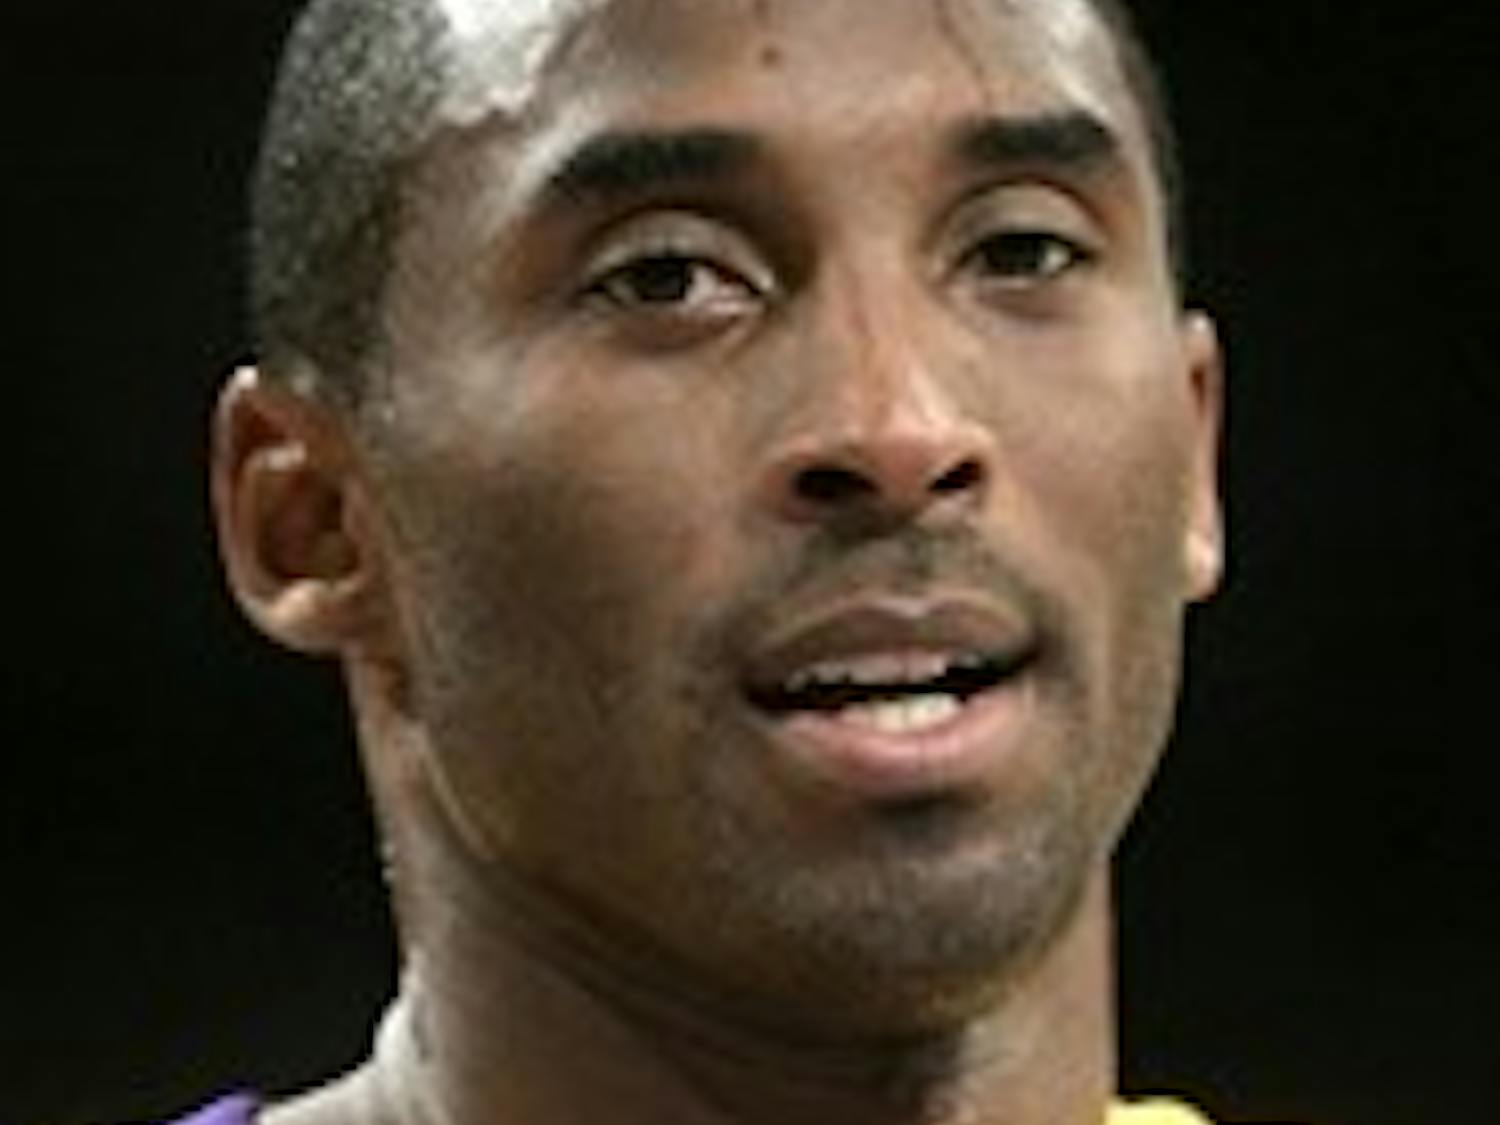 **FILE** Los Angeles Lakers' Kobe Bryant is seen during a basketball game against the Houston Rockets in Los Angeles in this Oct. 30, 2007 file photo. Chicago Bulls general manager John Paxson basically squashed the notion that Bryant will wind up in Chicago, saying, Thursday, Nov. 1, 2007, the teams were never on the verge of a deal and talks were over for now.(AP Photo/Matt Sayles)